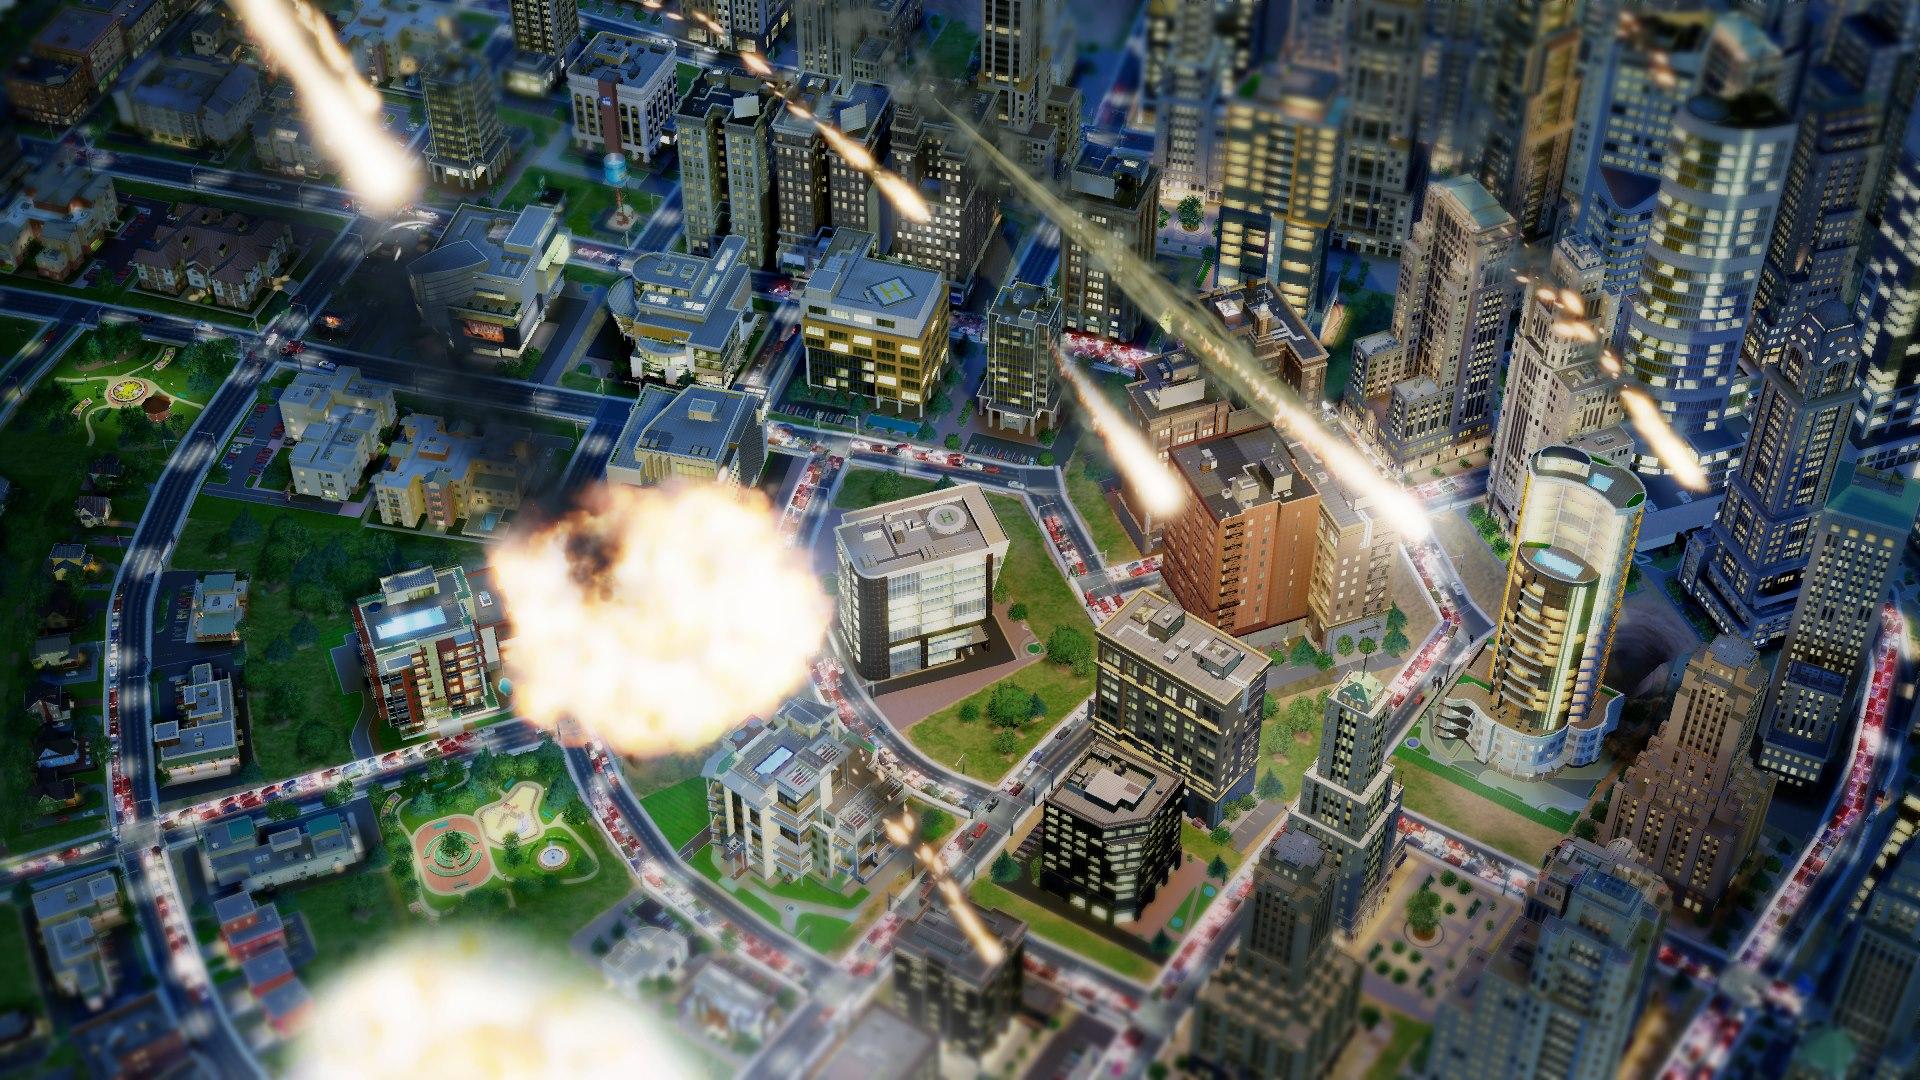 EA closes SimCity studio Maxis after 29 years